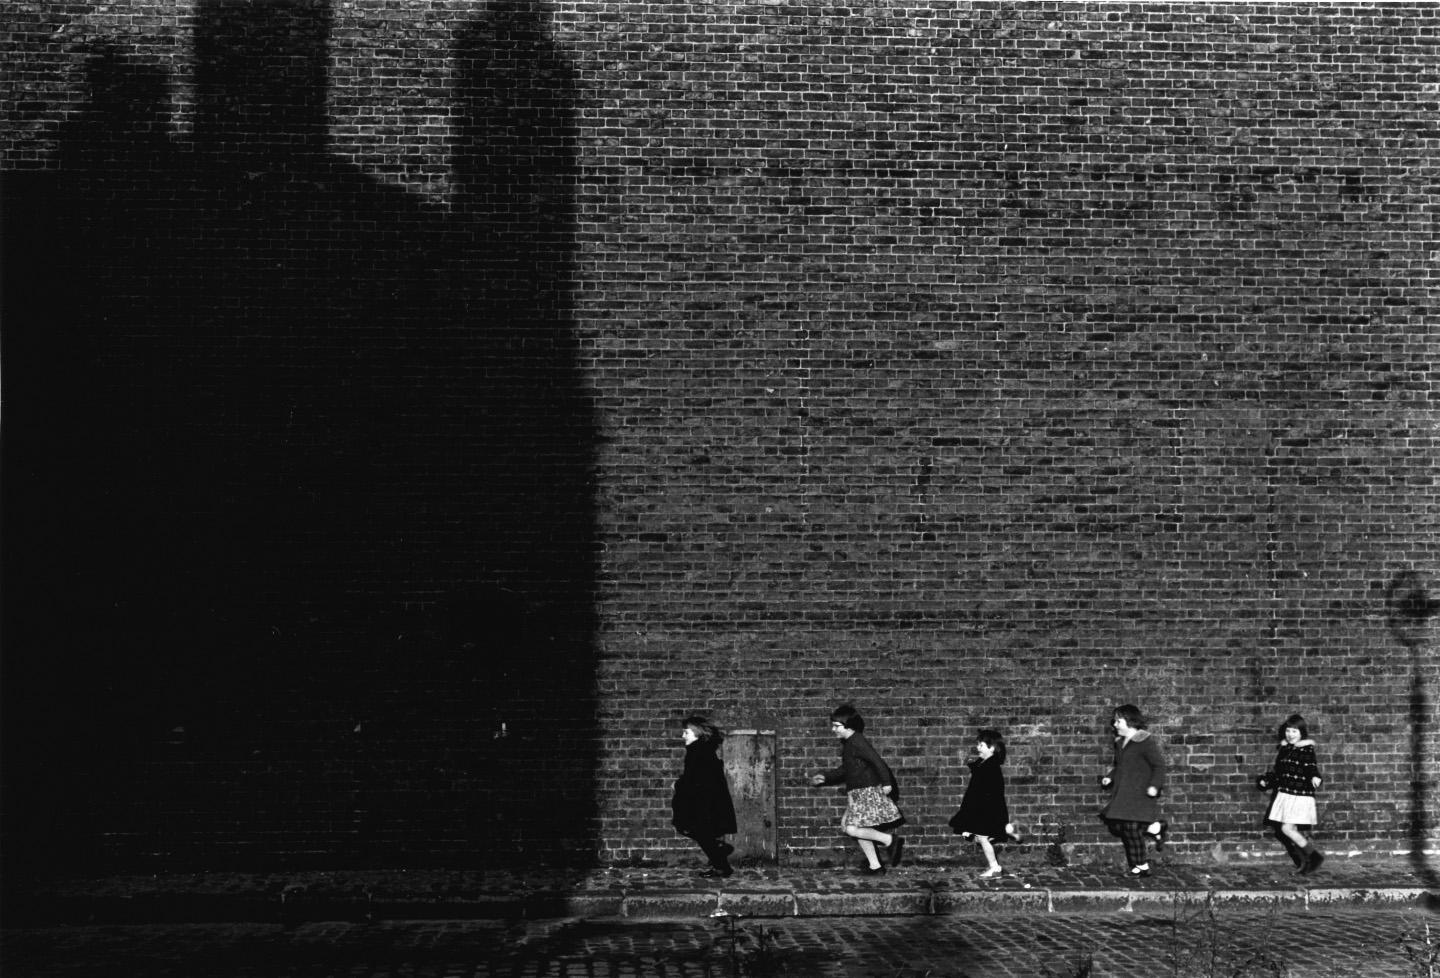 Colin Jones Black and White Photograph - The Wall of the Tobacco and Alcohol Dock, off Wapping High Street, London 